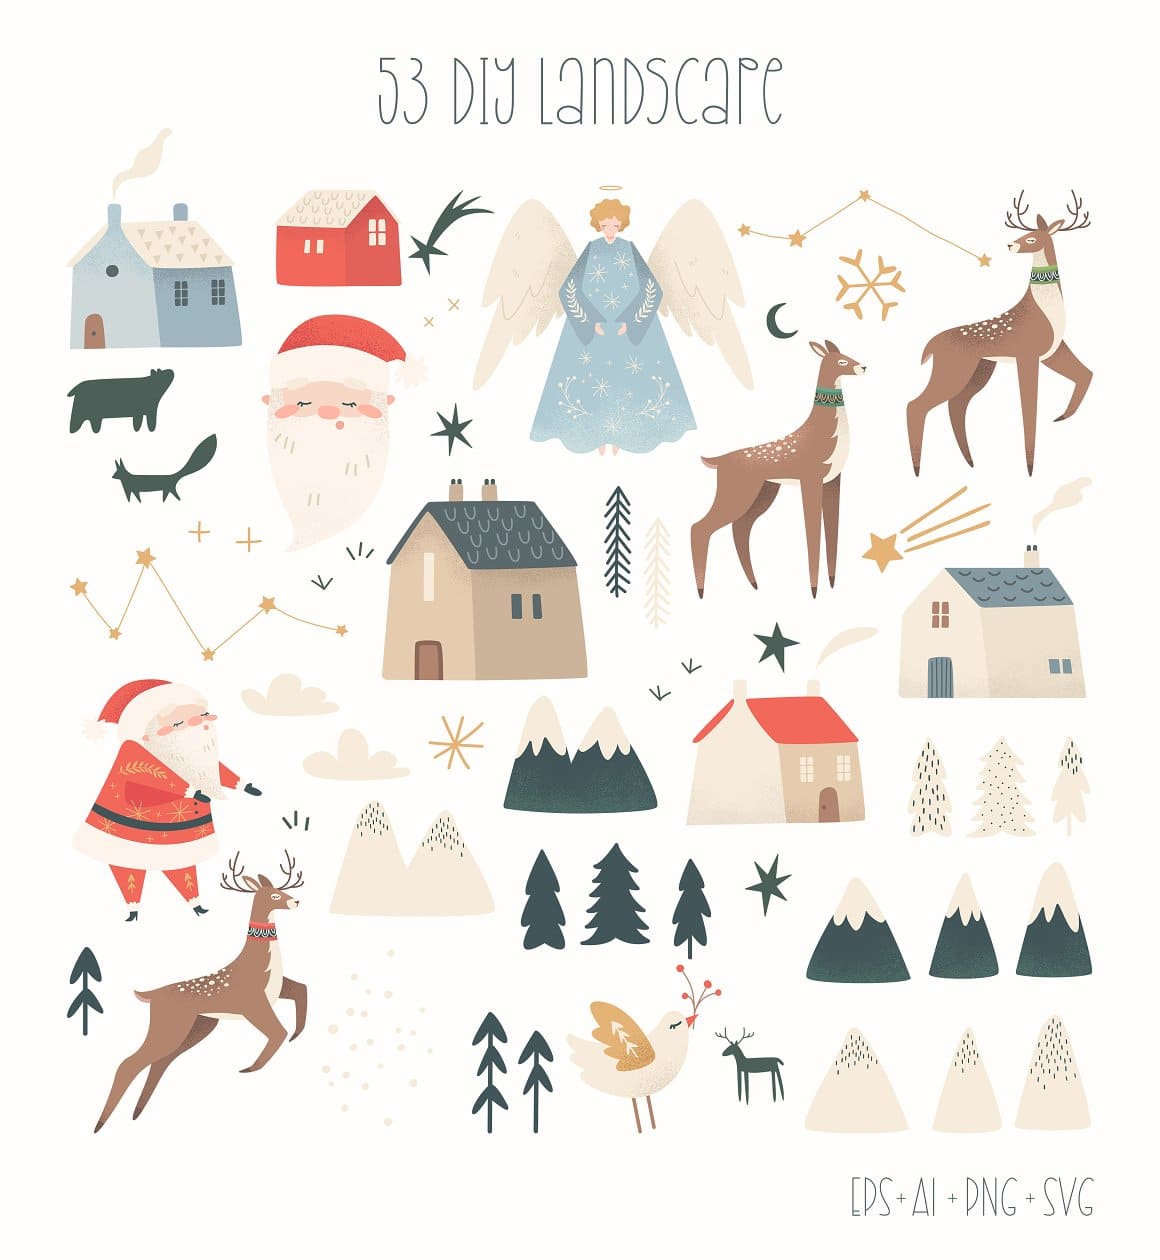 53 elements: mountains, Christmas trees, wild animals associated with Christmas.